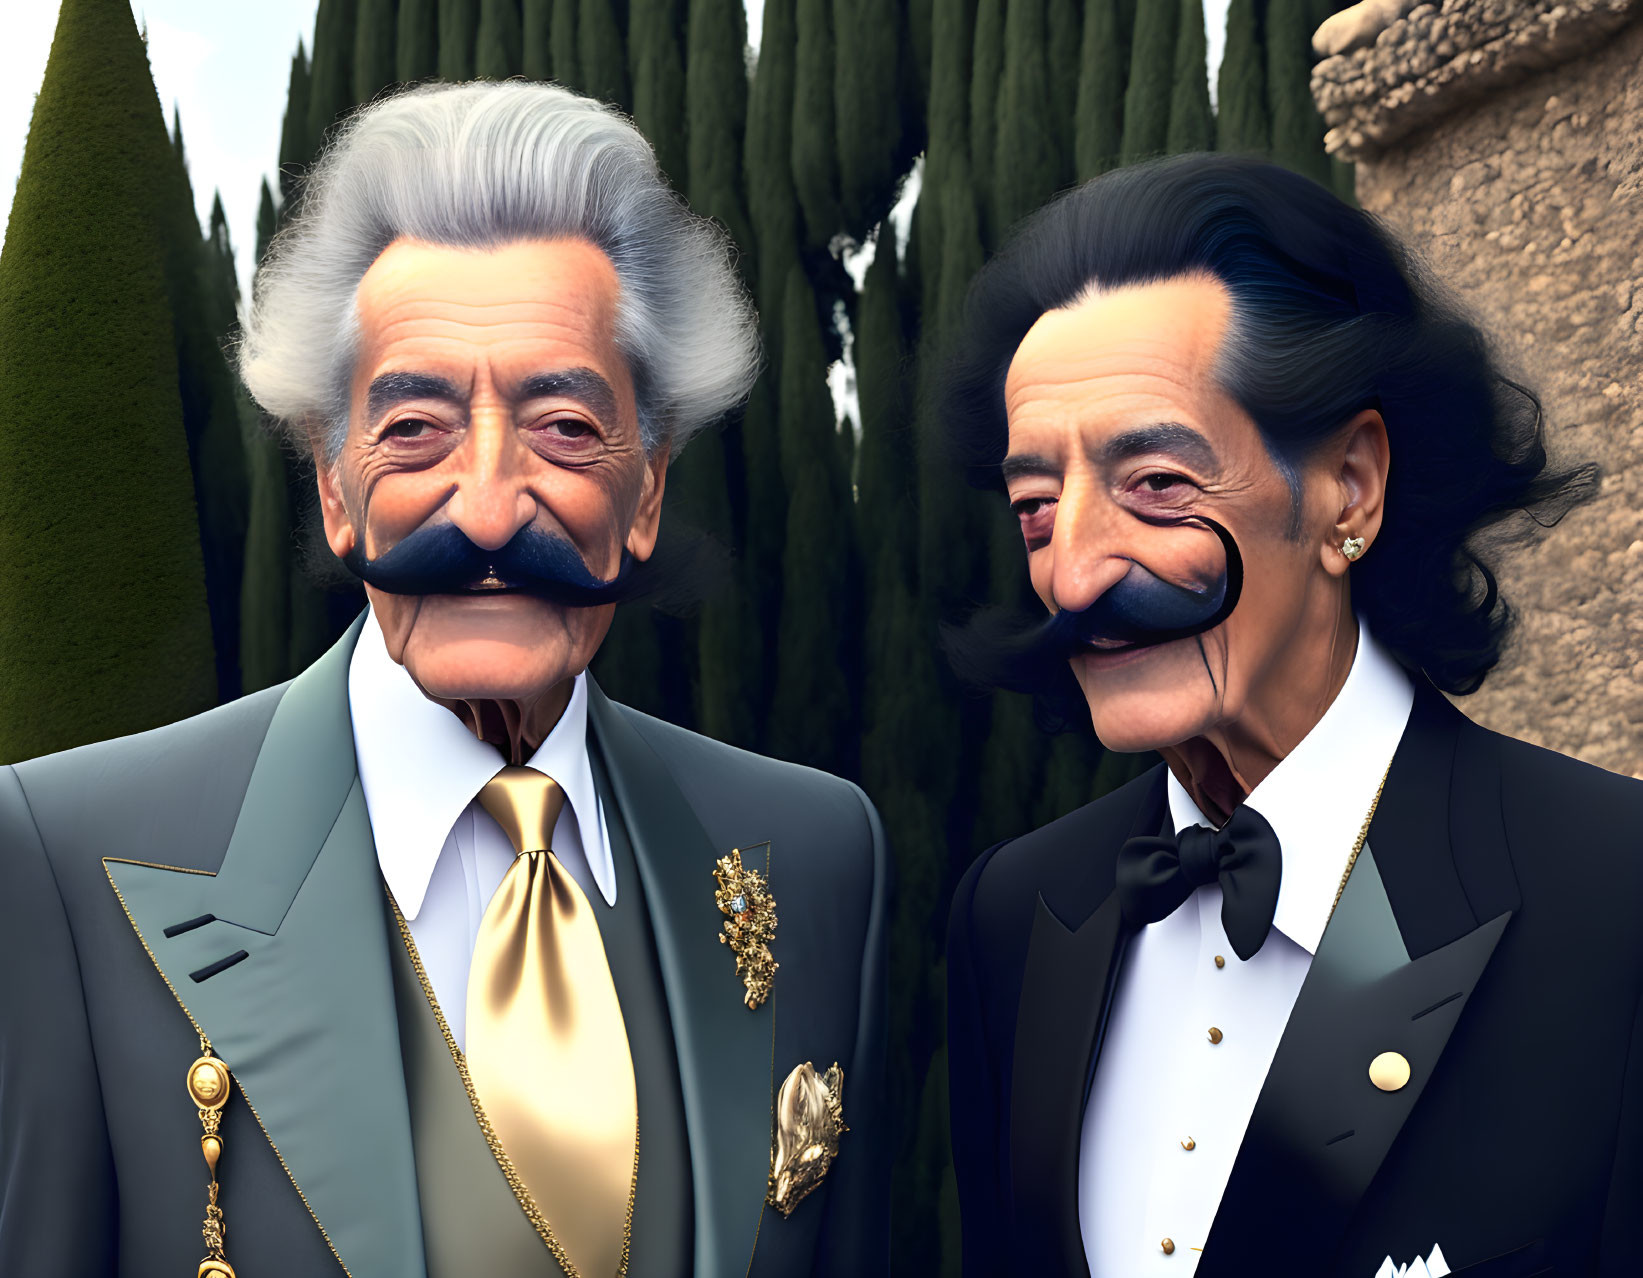 The Dali Brothers 8